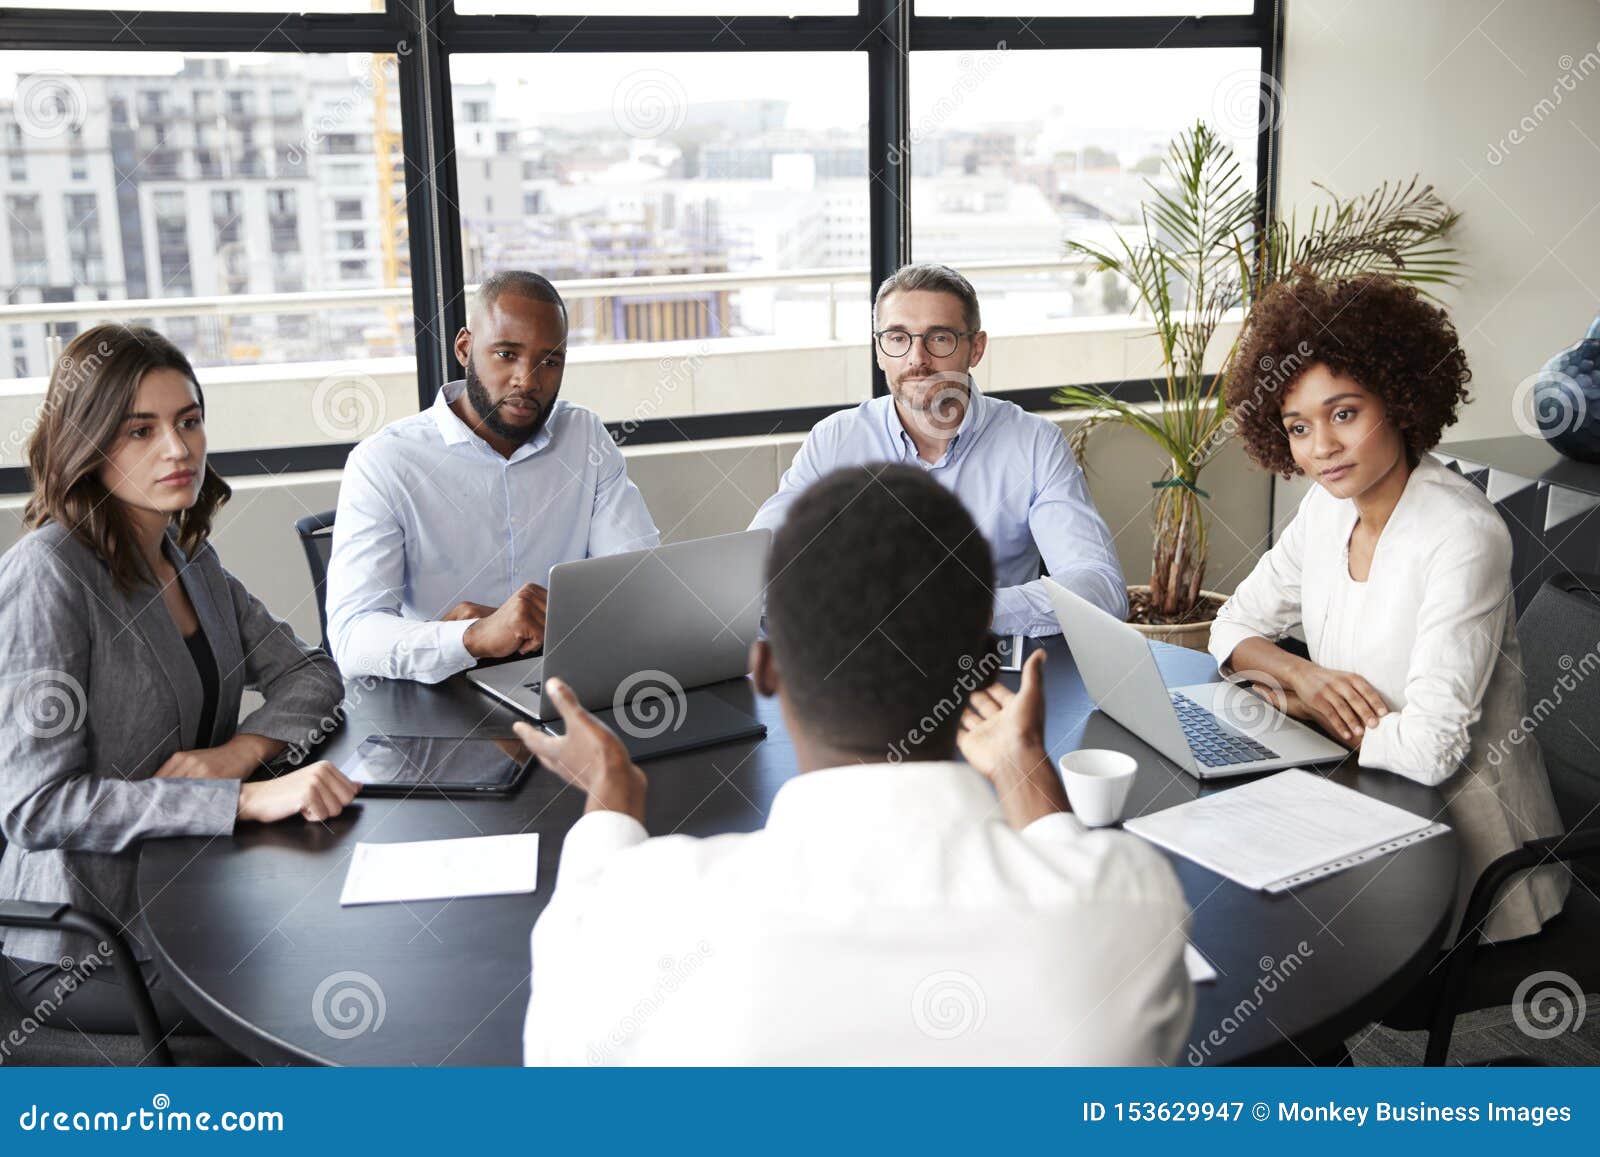 corporate business people in a meeting room listening to a colleague speaking, elevated view